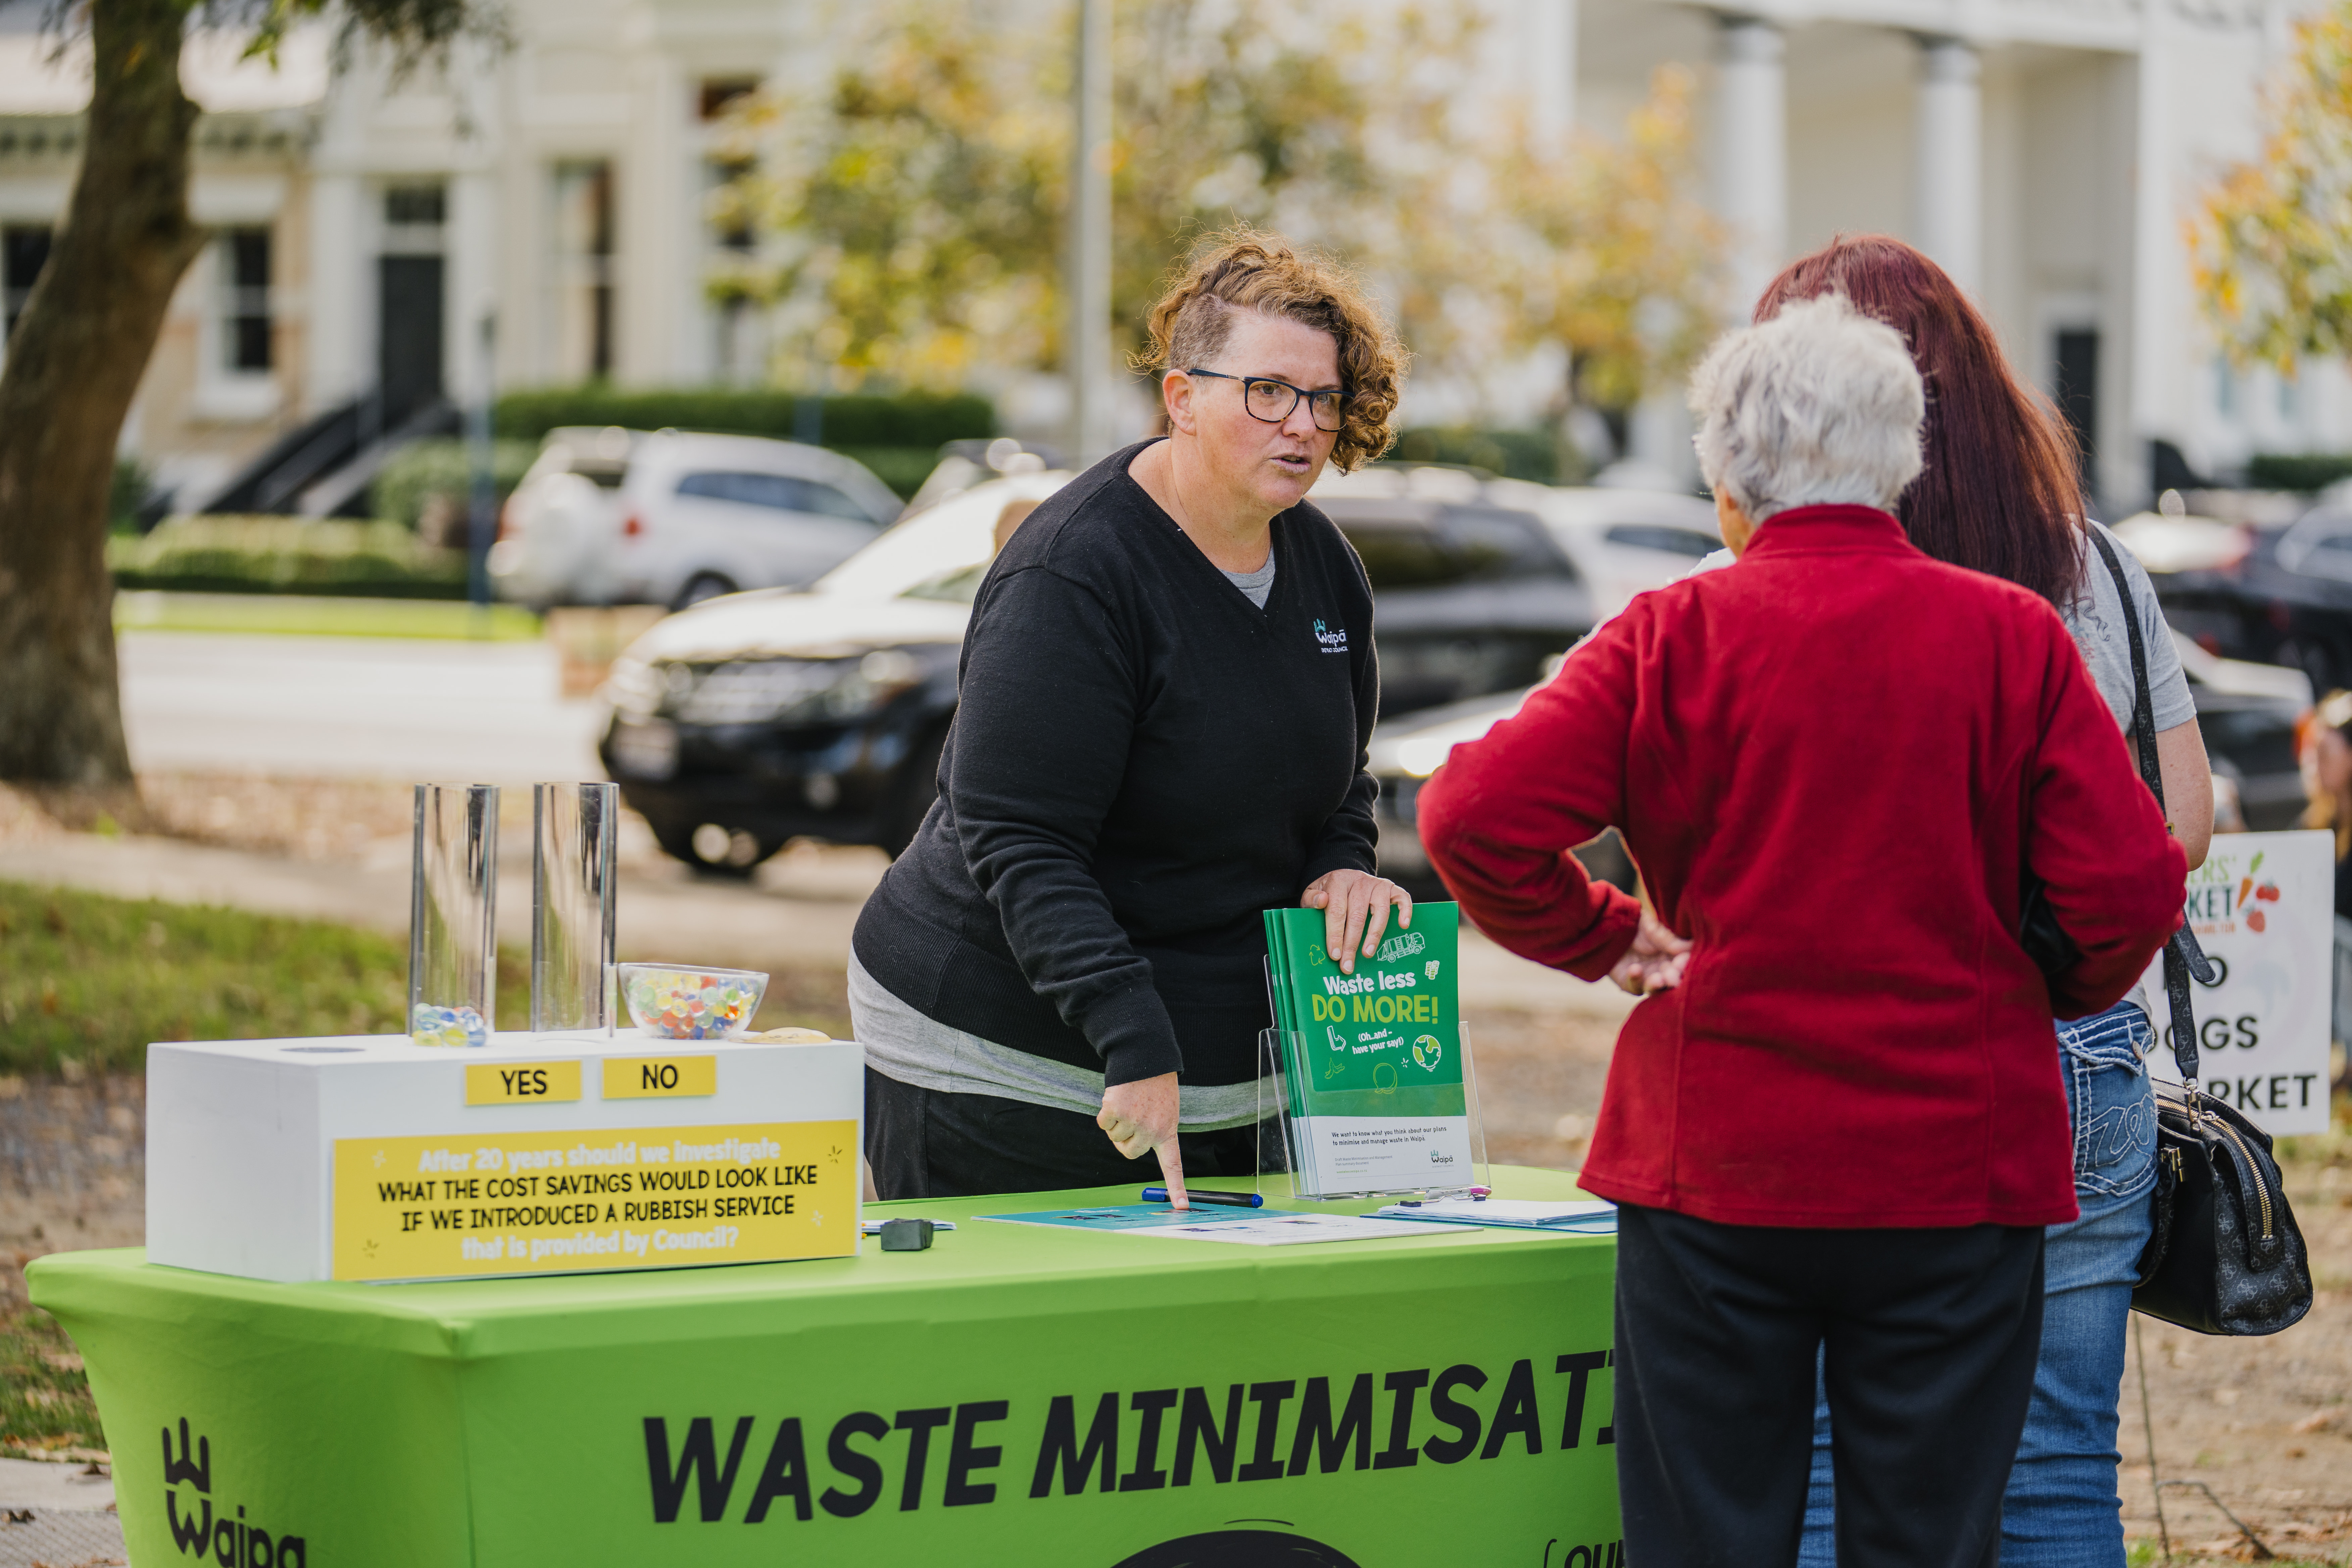 Council’s waste minimisation advisor Sally Fraser out in the community during consultation on the draft plan.